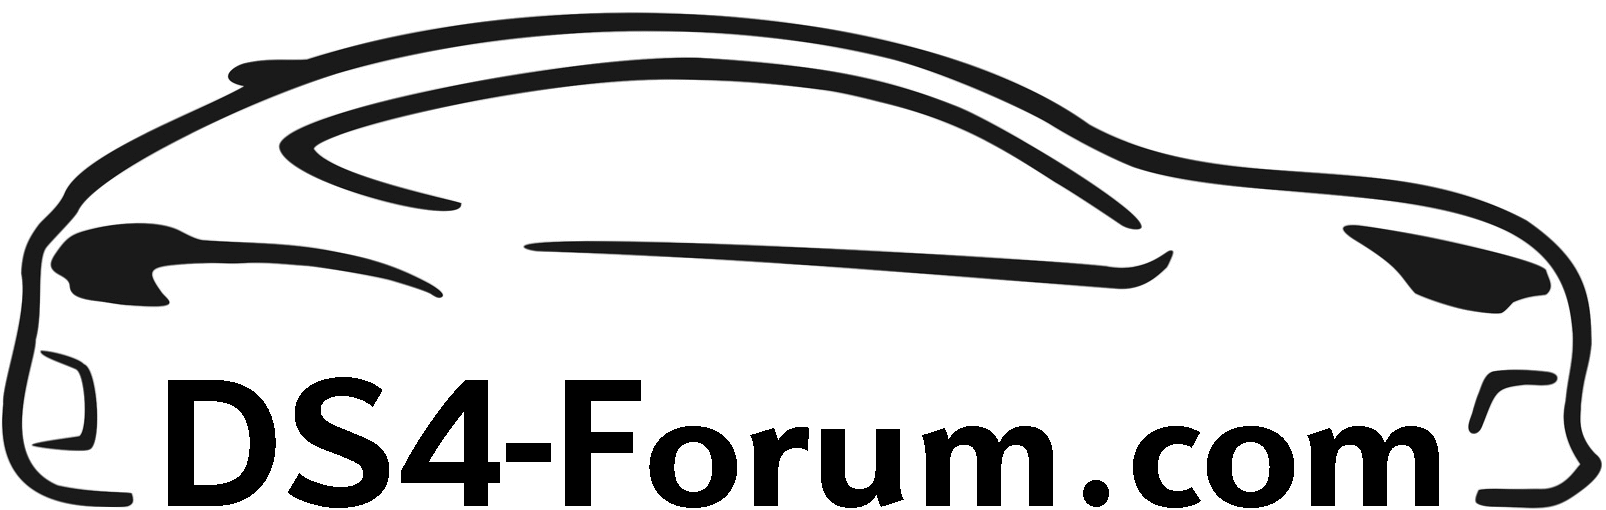 ds4-forum-logo2.png